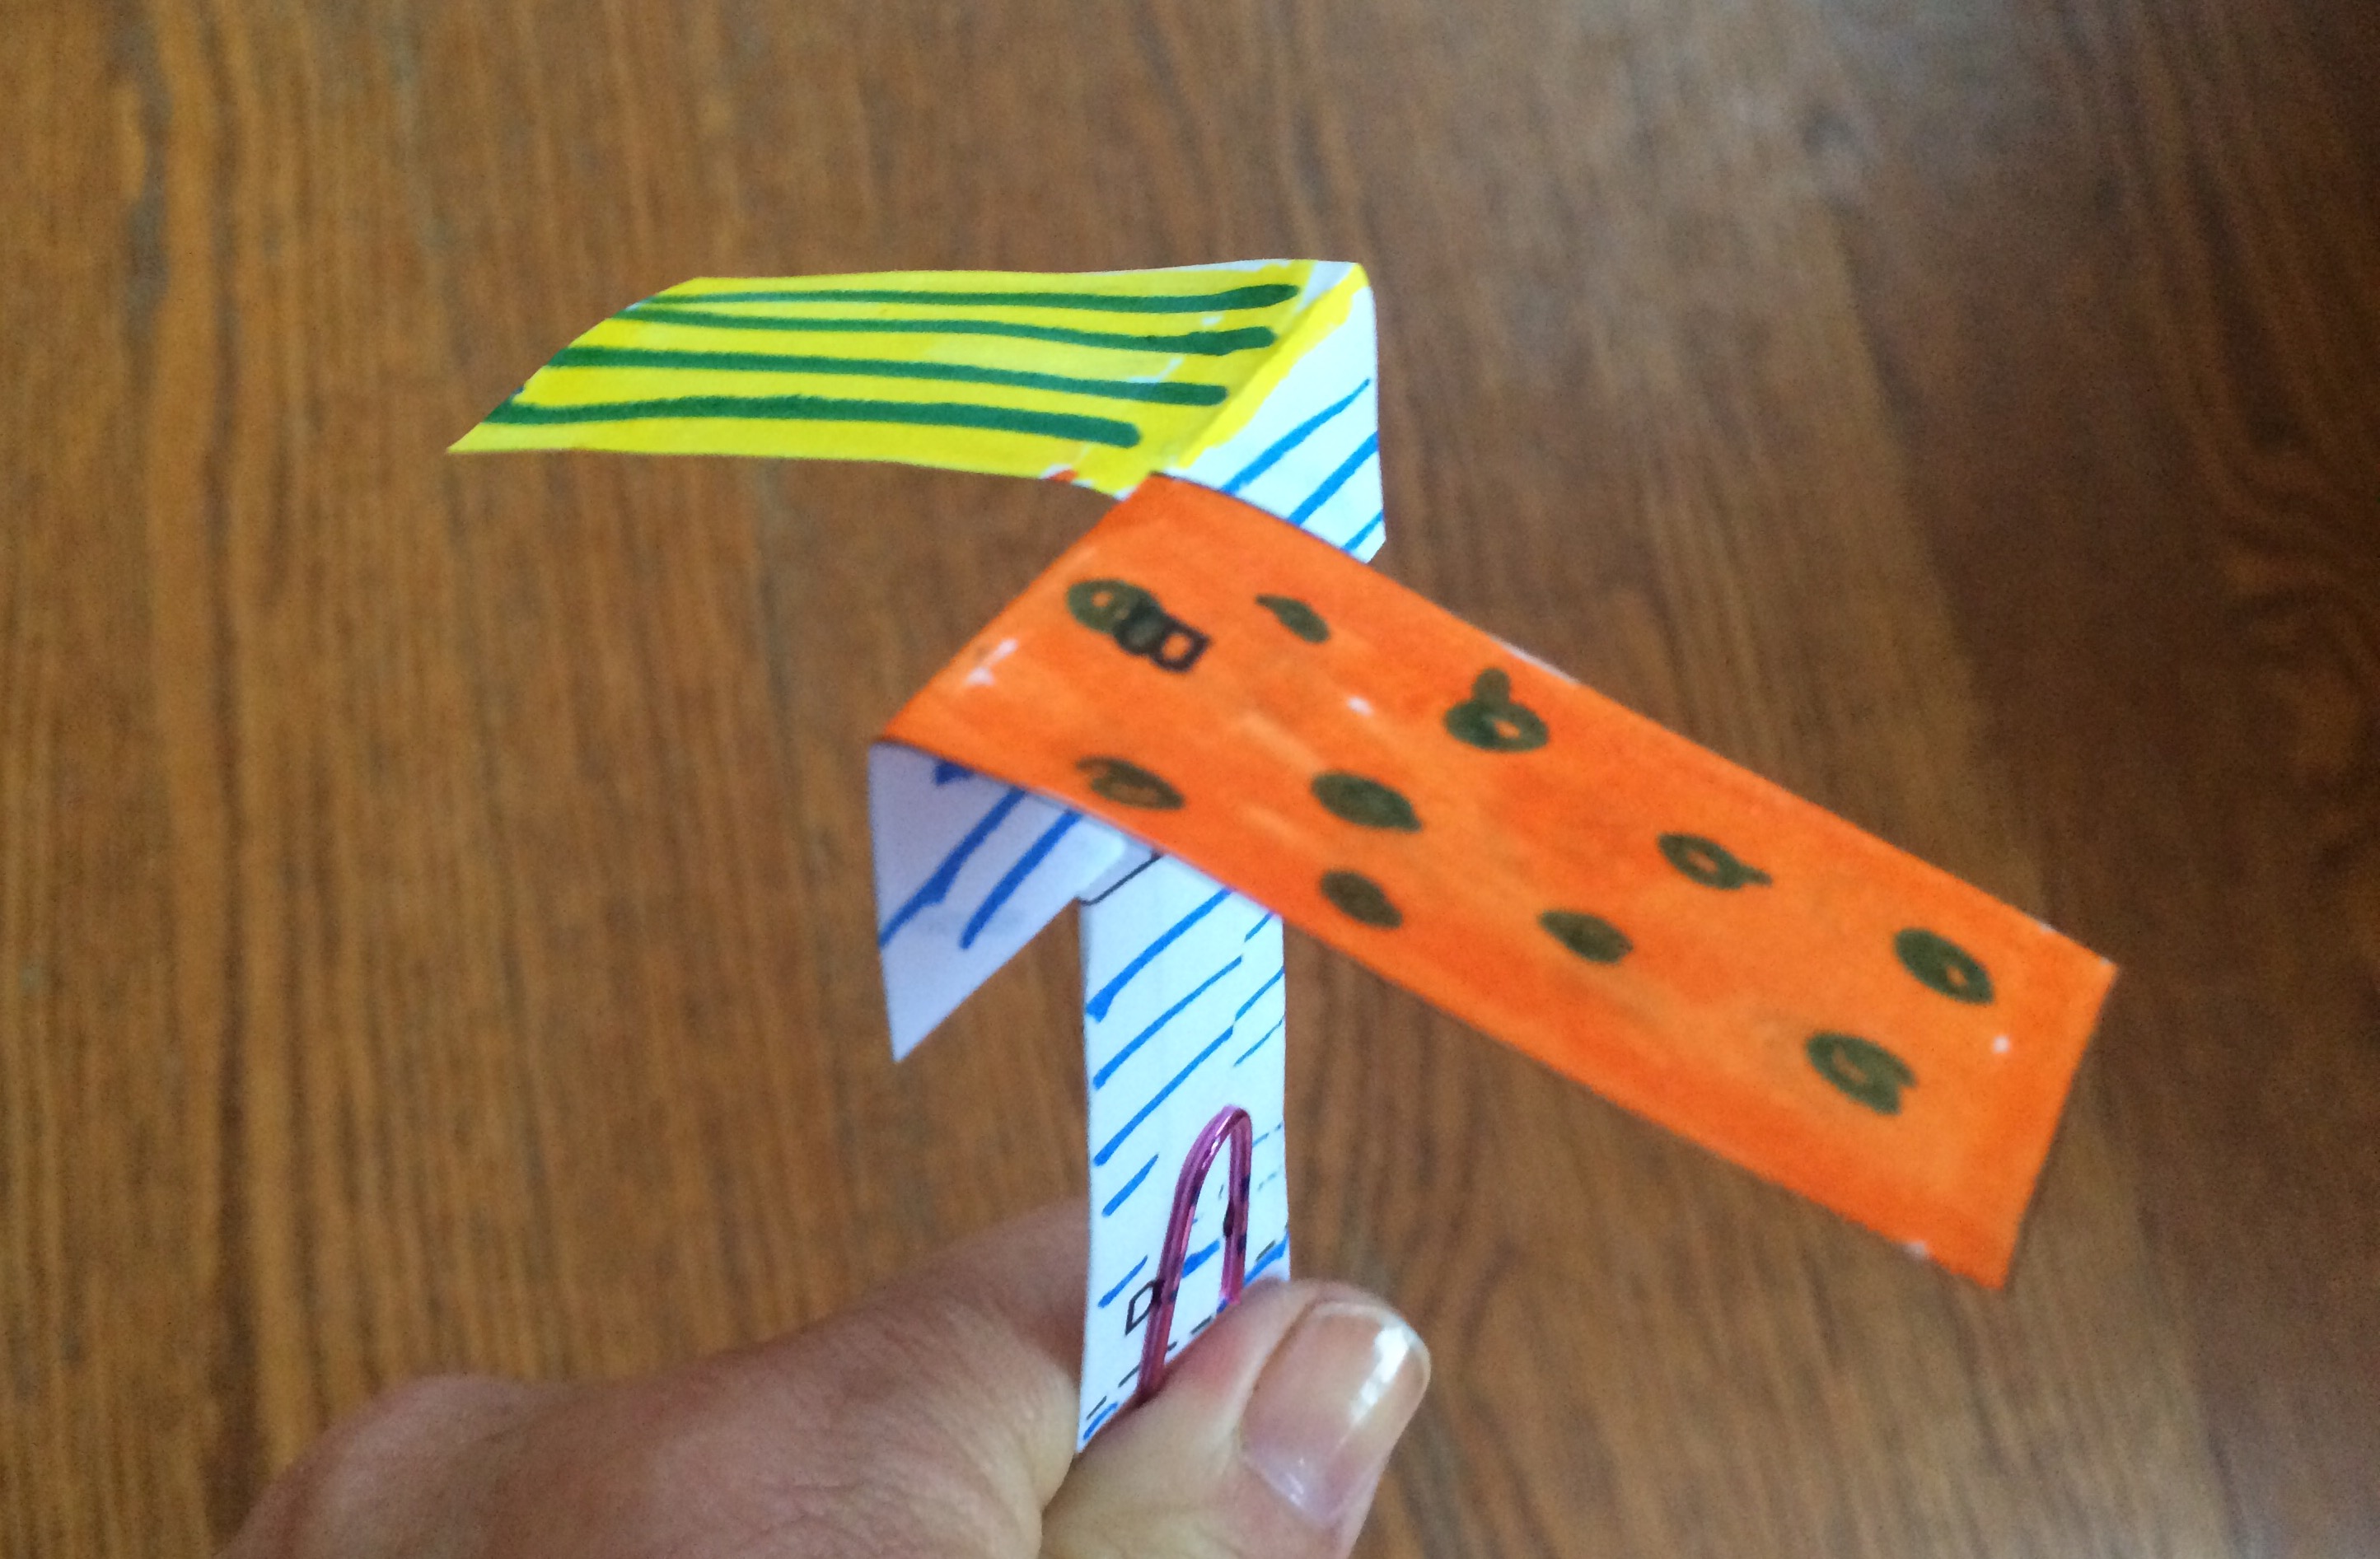 The paper helicopter experiment